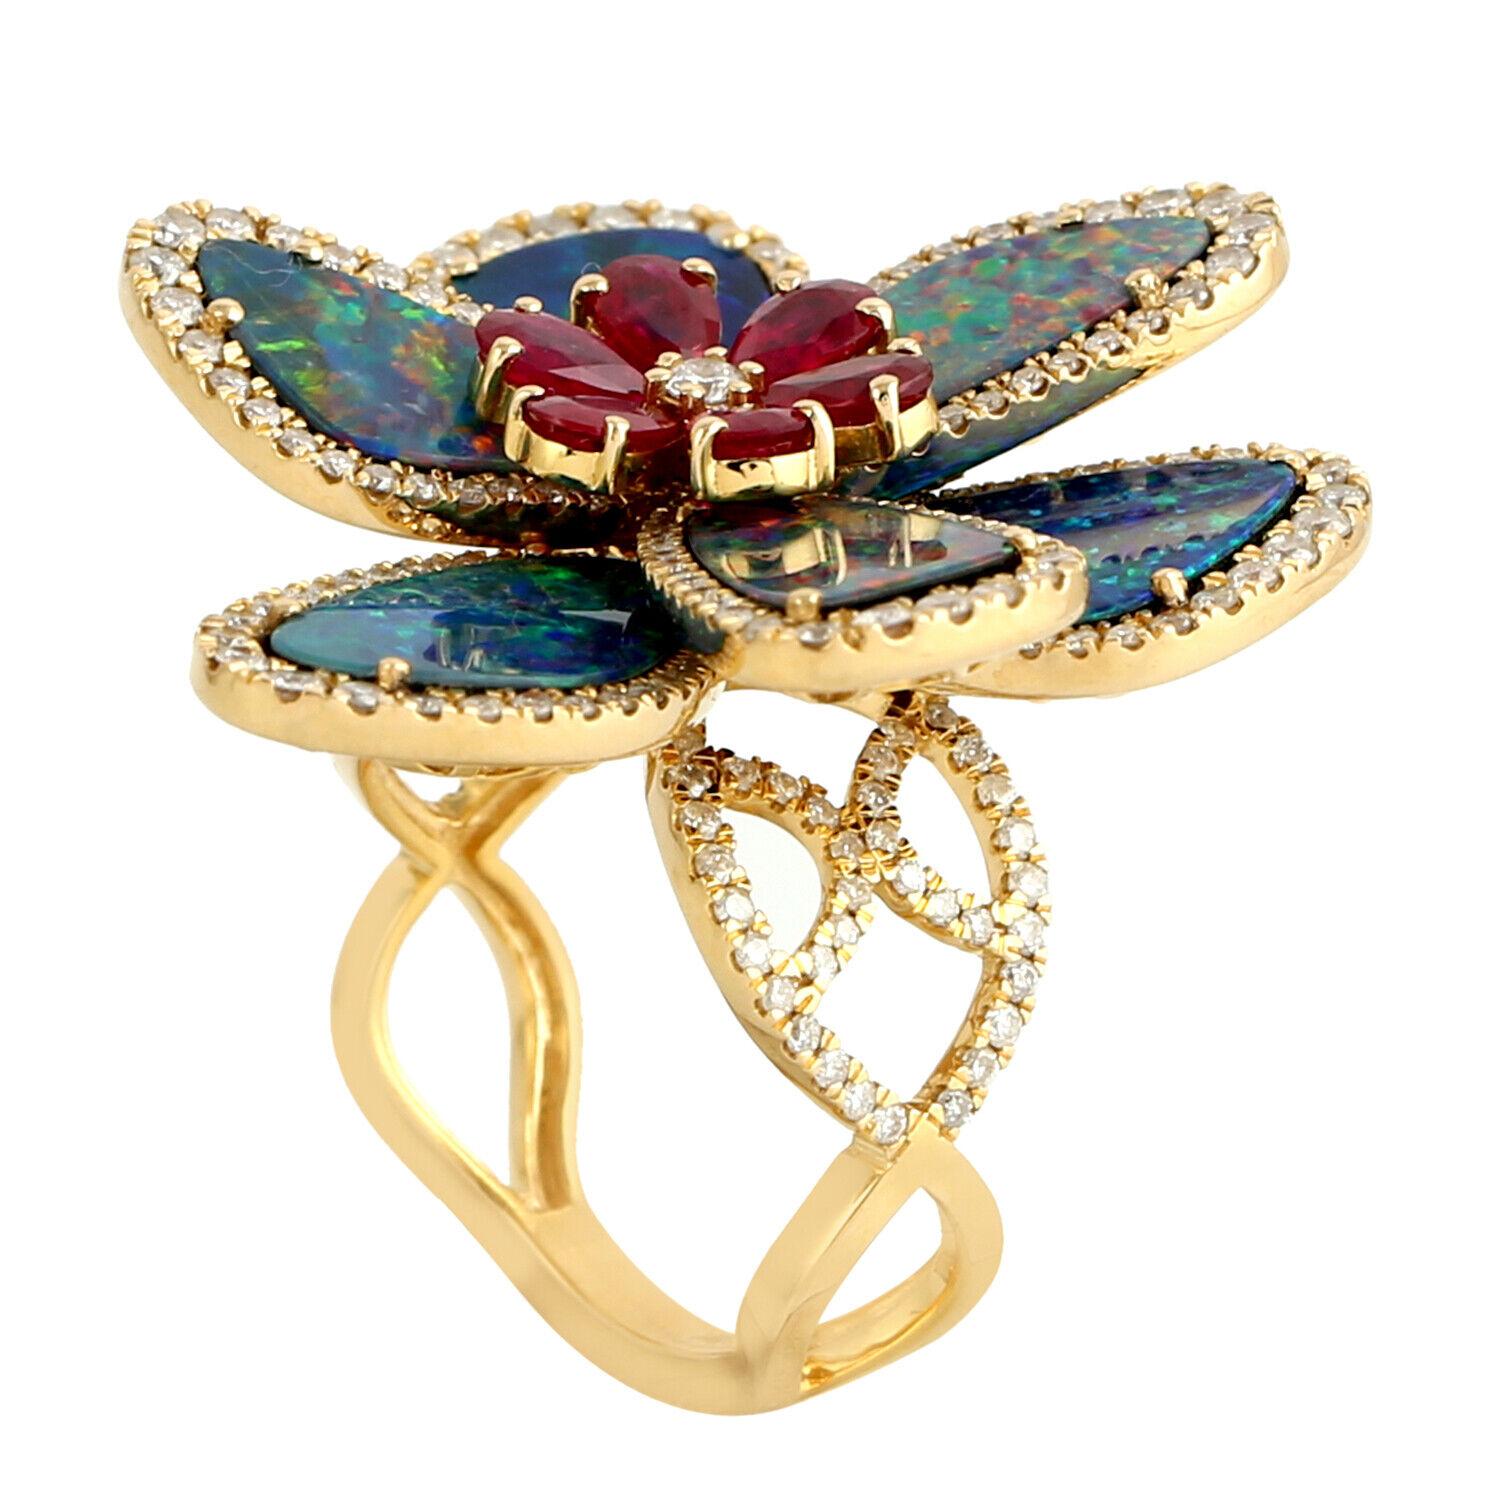 Mixed Cut Meghna Jewels Opal Ruby Diamond 14 Karat Gold Floral Ring For Sale